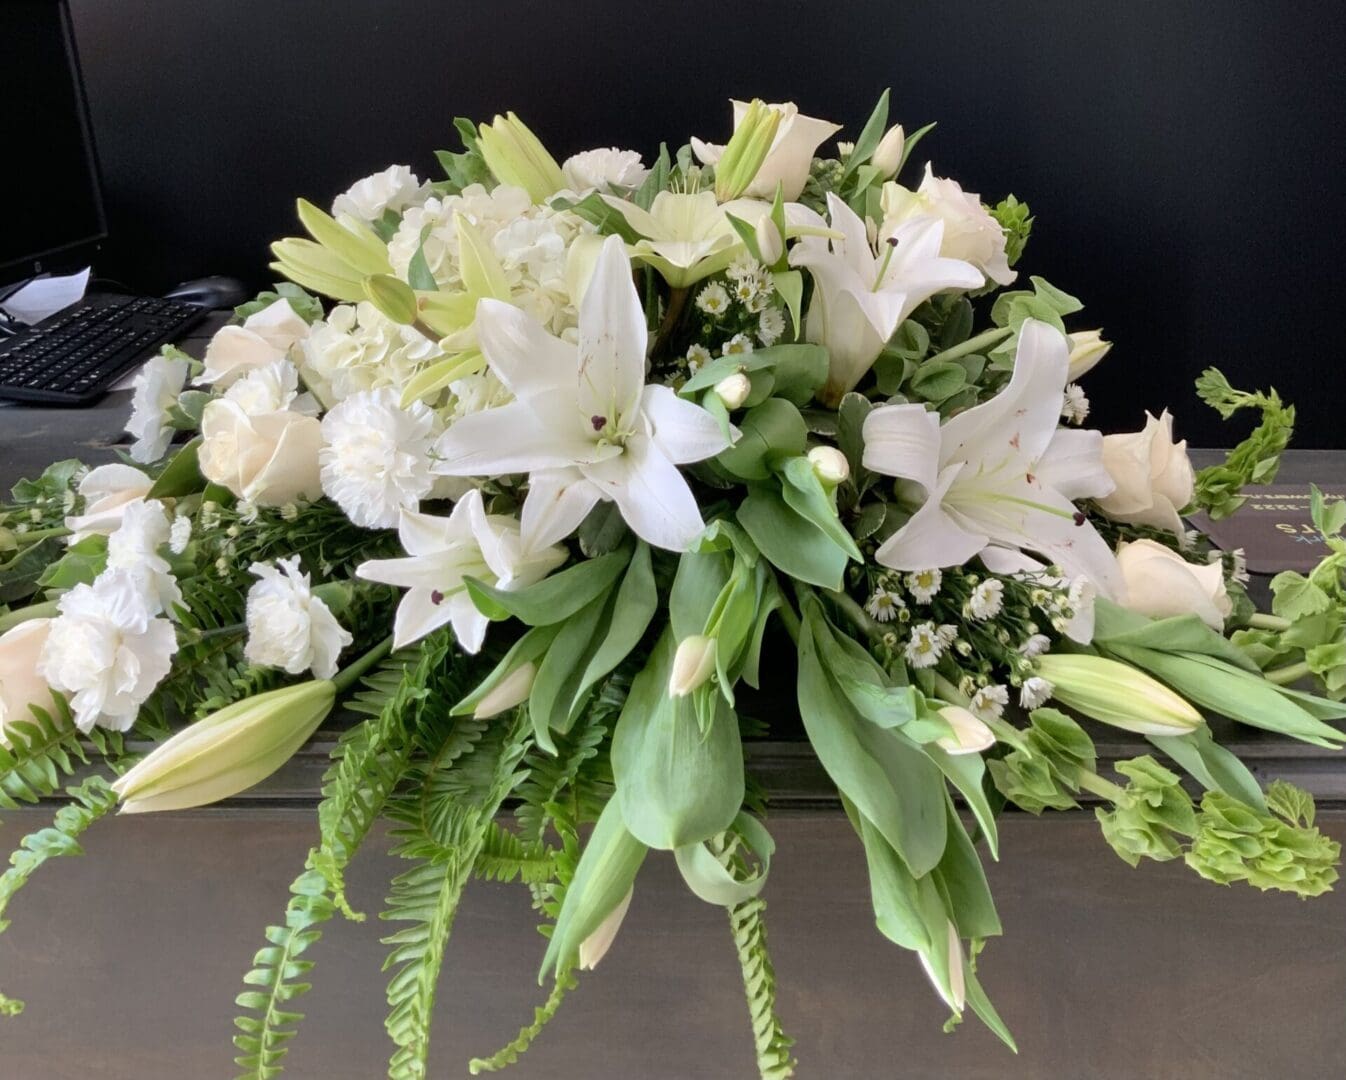 White lilies and roses